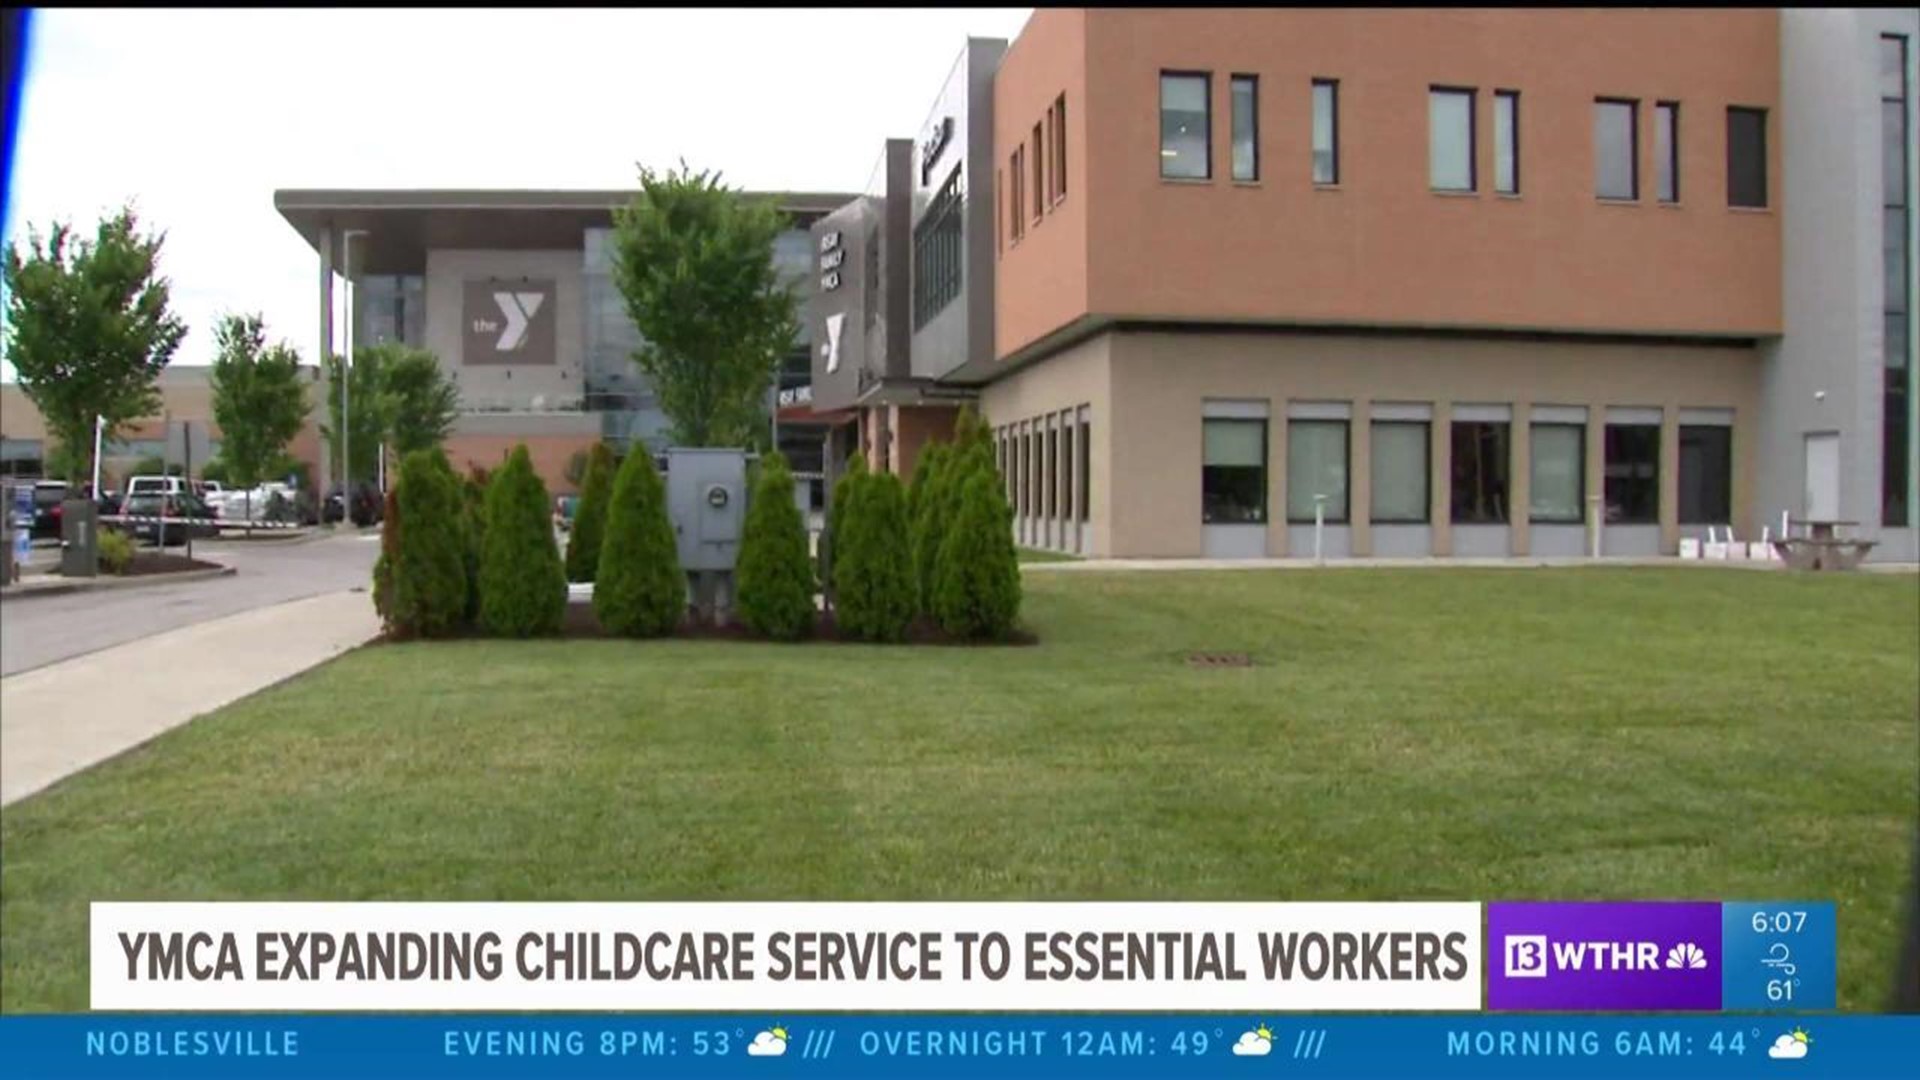 YMCA expanding childcare service to essential workers